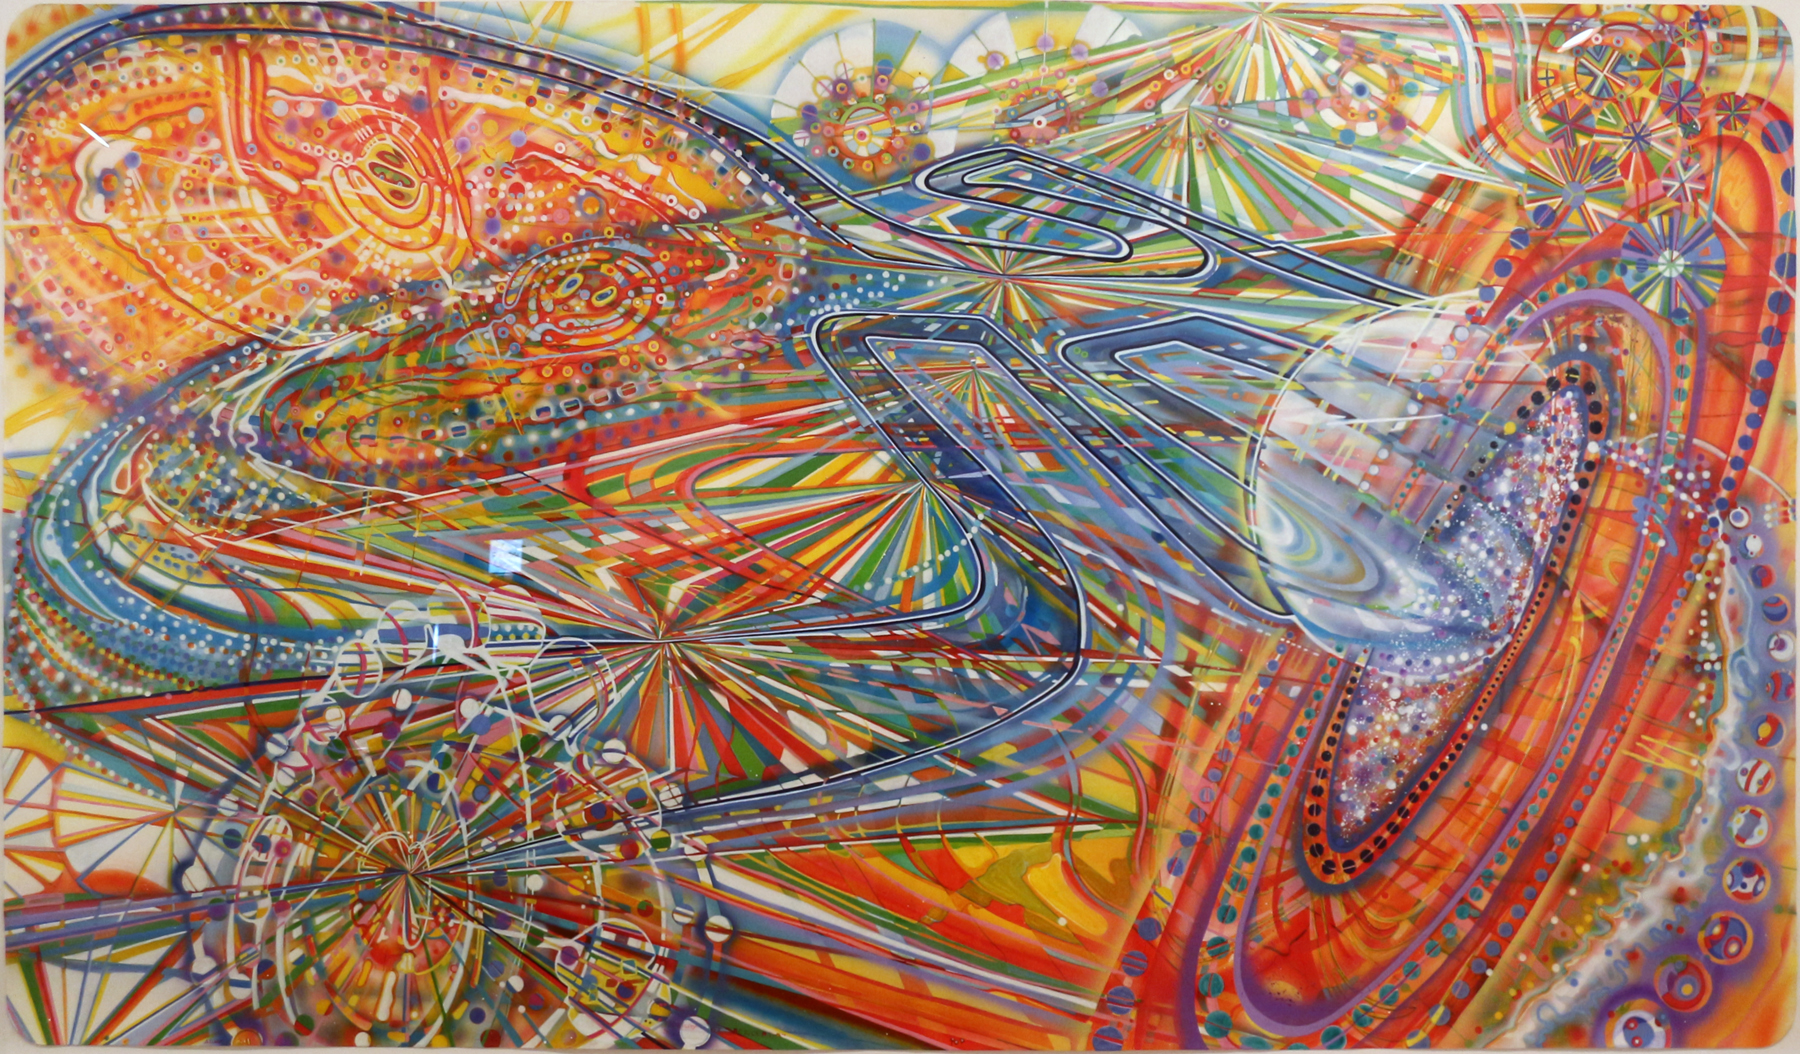   Ati Maier   Possibility of Perception,  2011 ink and airbrush on paper 52 x 94 inches 